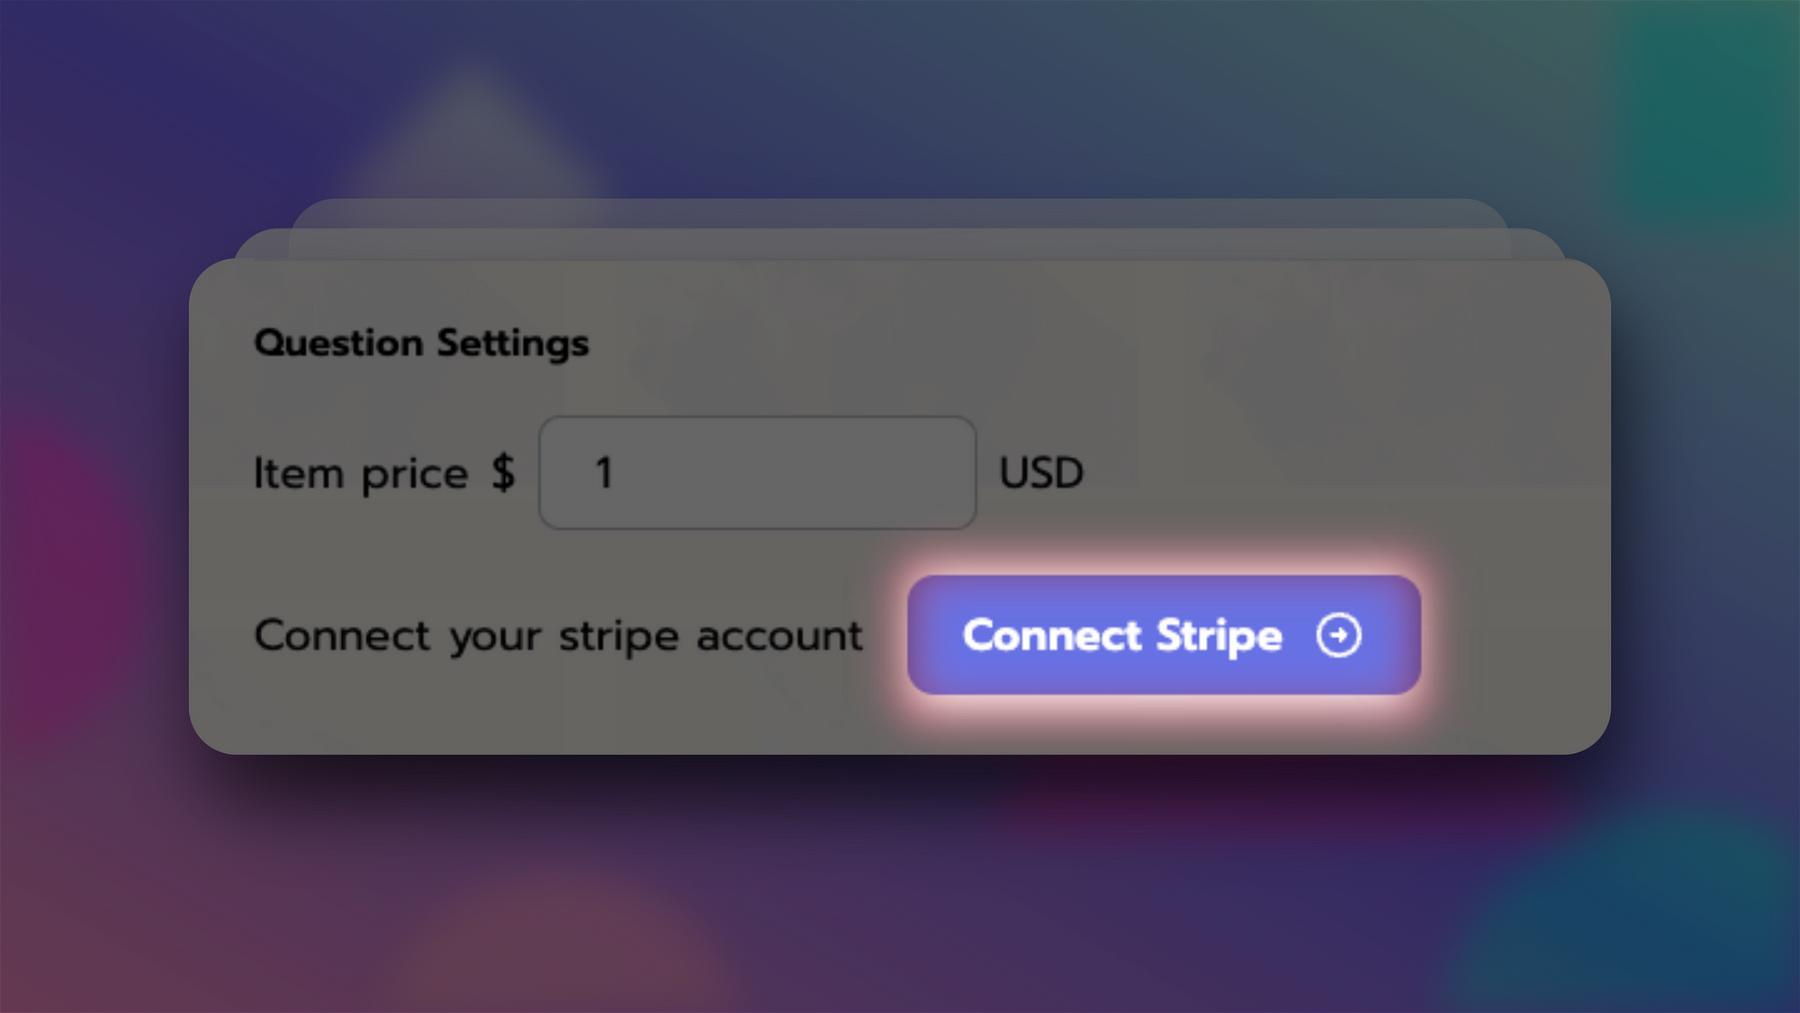 You will need to press the “Connect Stripe” button near the bottom of the payment component to connect your Stripe account so that you can start accepting payments.